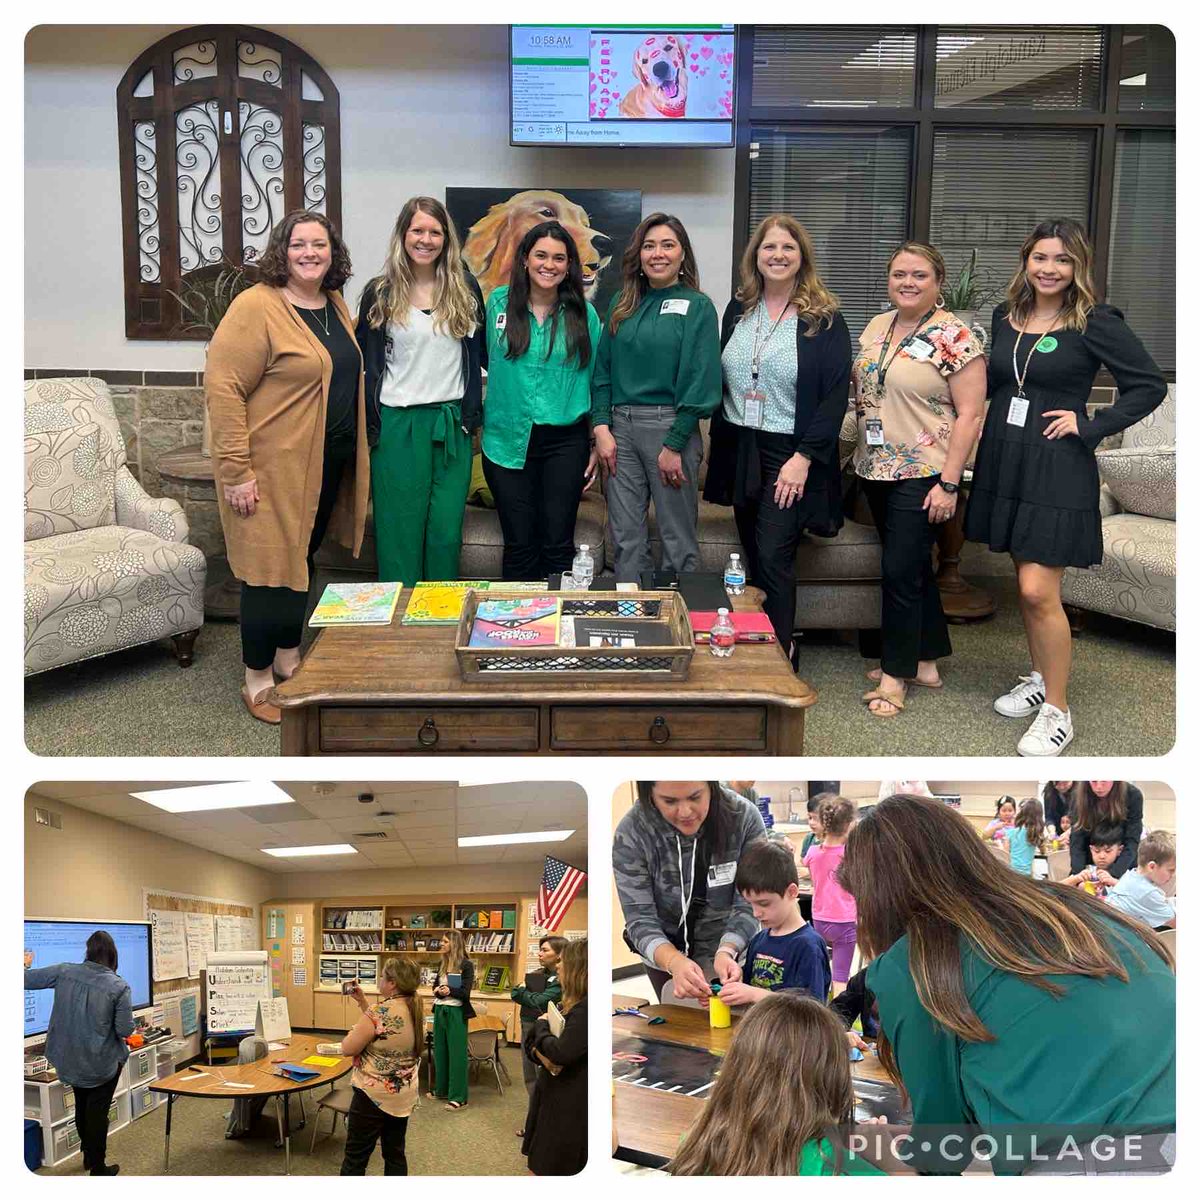 We loved having staff members from Rockport-Fulton ISD visit JRE to see all of the amazing things happening! We gain so much from collaborating with other educators. #jrerocks